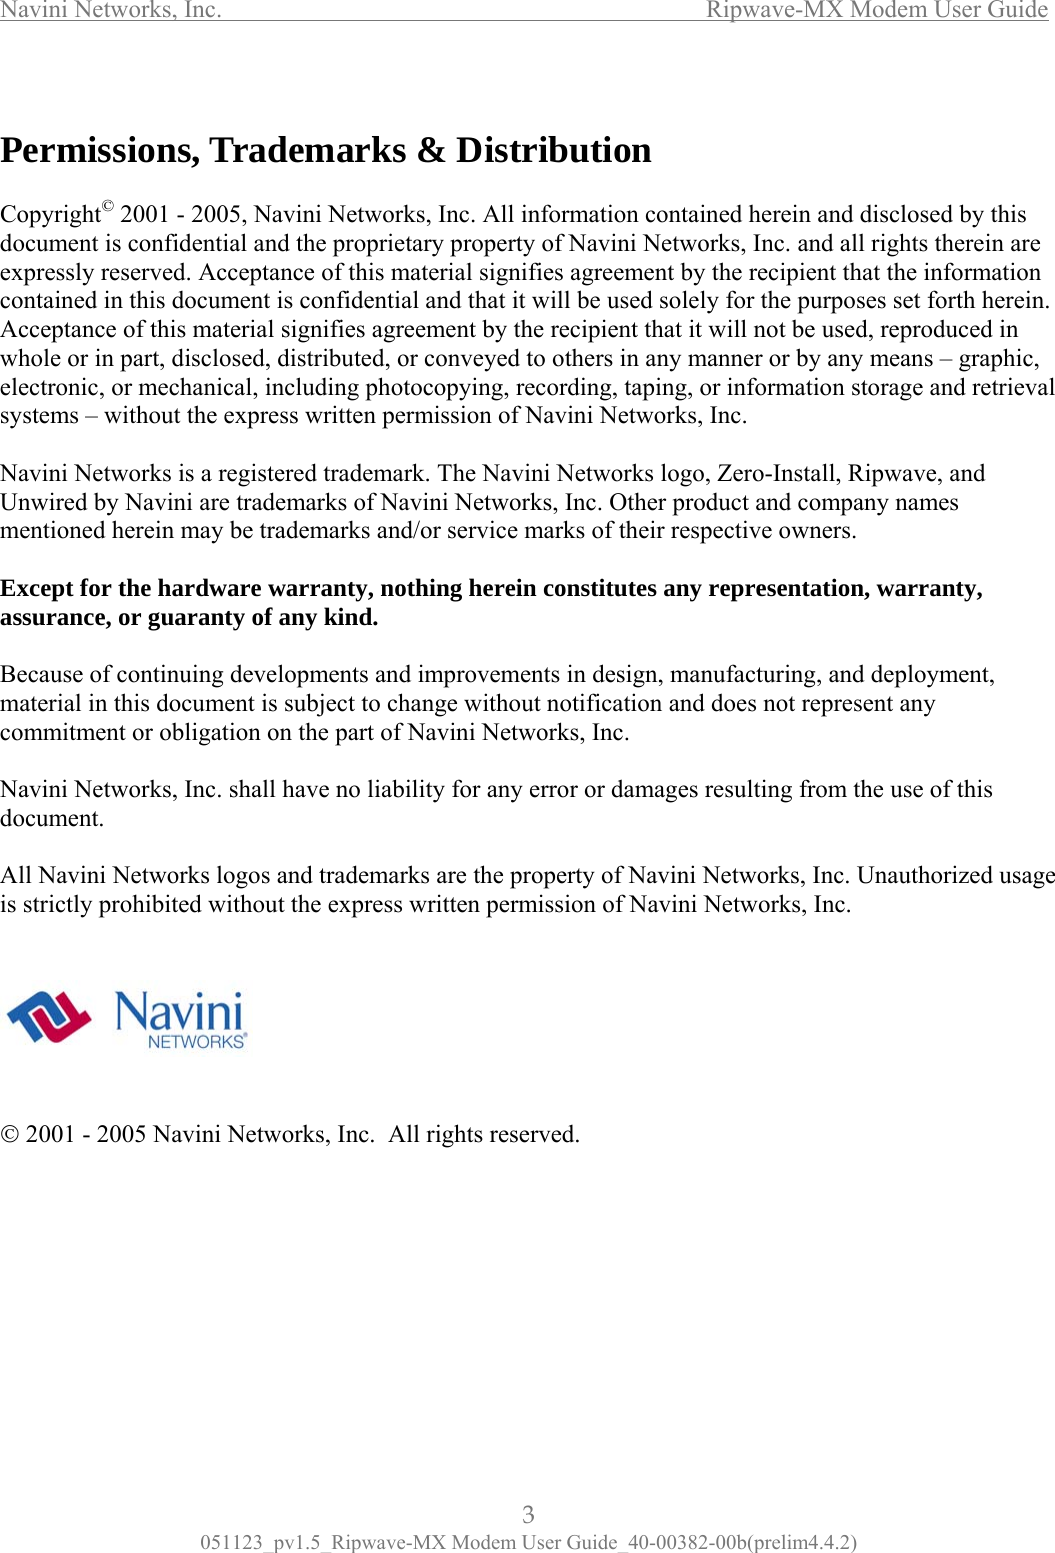 Navini Networks, Inc.                  Ripwave-MX Modem User Guide  Permissions, Trademarks &amp; Distribution  Namaco       Copyright© 2001 - 2005, Navini Networks, Inc. All information contained herein and disclosed by this document is confidential and the proprietary property of Navini Networks, Inc. and all rights therein are expressly reserved. Acceptance of this material signifies agreement by the recipient that the information contained in this document is confidential and that it will be used solely for the purposes set forth herein. Acceptance of this material signifies agreement by the recipient that it will not be used, reproduced in whole or in part, disclosed, distributed, or conveyed to others in any manner or by any means – graphic, electronic, or mechanical, including photocopying, recording, taping, or information storage and retrieval systems – without the express written permission of Navini Networks, Inc.  vini Networks is a registered trademark. The Navini Networks logo, Zero-Install, Ripwave, and Unwired by Navini are trademarks of Navini Networks, Inc. Other product and company names mentioned herein may be trademarks and/or service marks of their respective owners.  Except for the hardware warranty, nothing herein constitutes any representation, warranty, assurance, or guaranty of any kind.  Because of continuing developments and improvements in design, manufacturing, and deployment, terial in this document is subject to change without notification and does not represent any mmitment or obligation on the part of Navini Networks, Inc.  Navini Networks, Inc. shall have no liability for any error or damages resulting from the use of this document.  All Navini Networks logos and trademarks are the property of Navini Networks, Inc. Unauthorized usage is strictly prohibited without the express written permission of Navini Networks, Inc. © 2001 - 2005 Navini Networks, Inc.  All rights reserved.       3 051123_pv1.5_Ripwave-MX Modem User Guide_40-00382-00b(prelim4.4.2) 